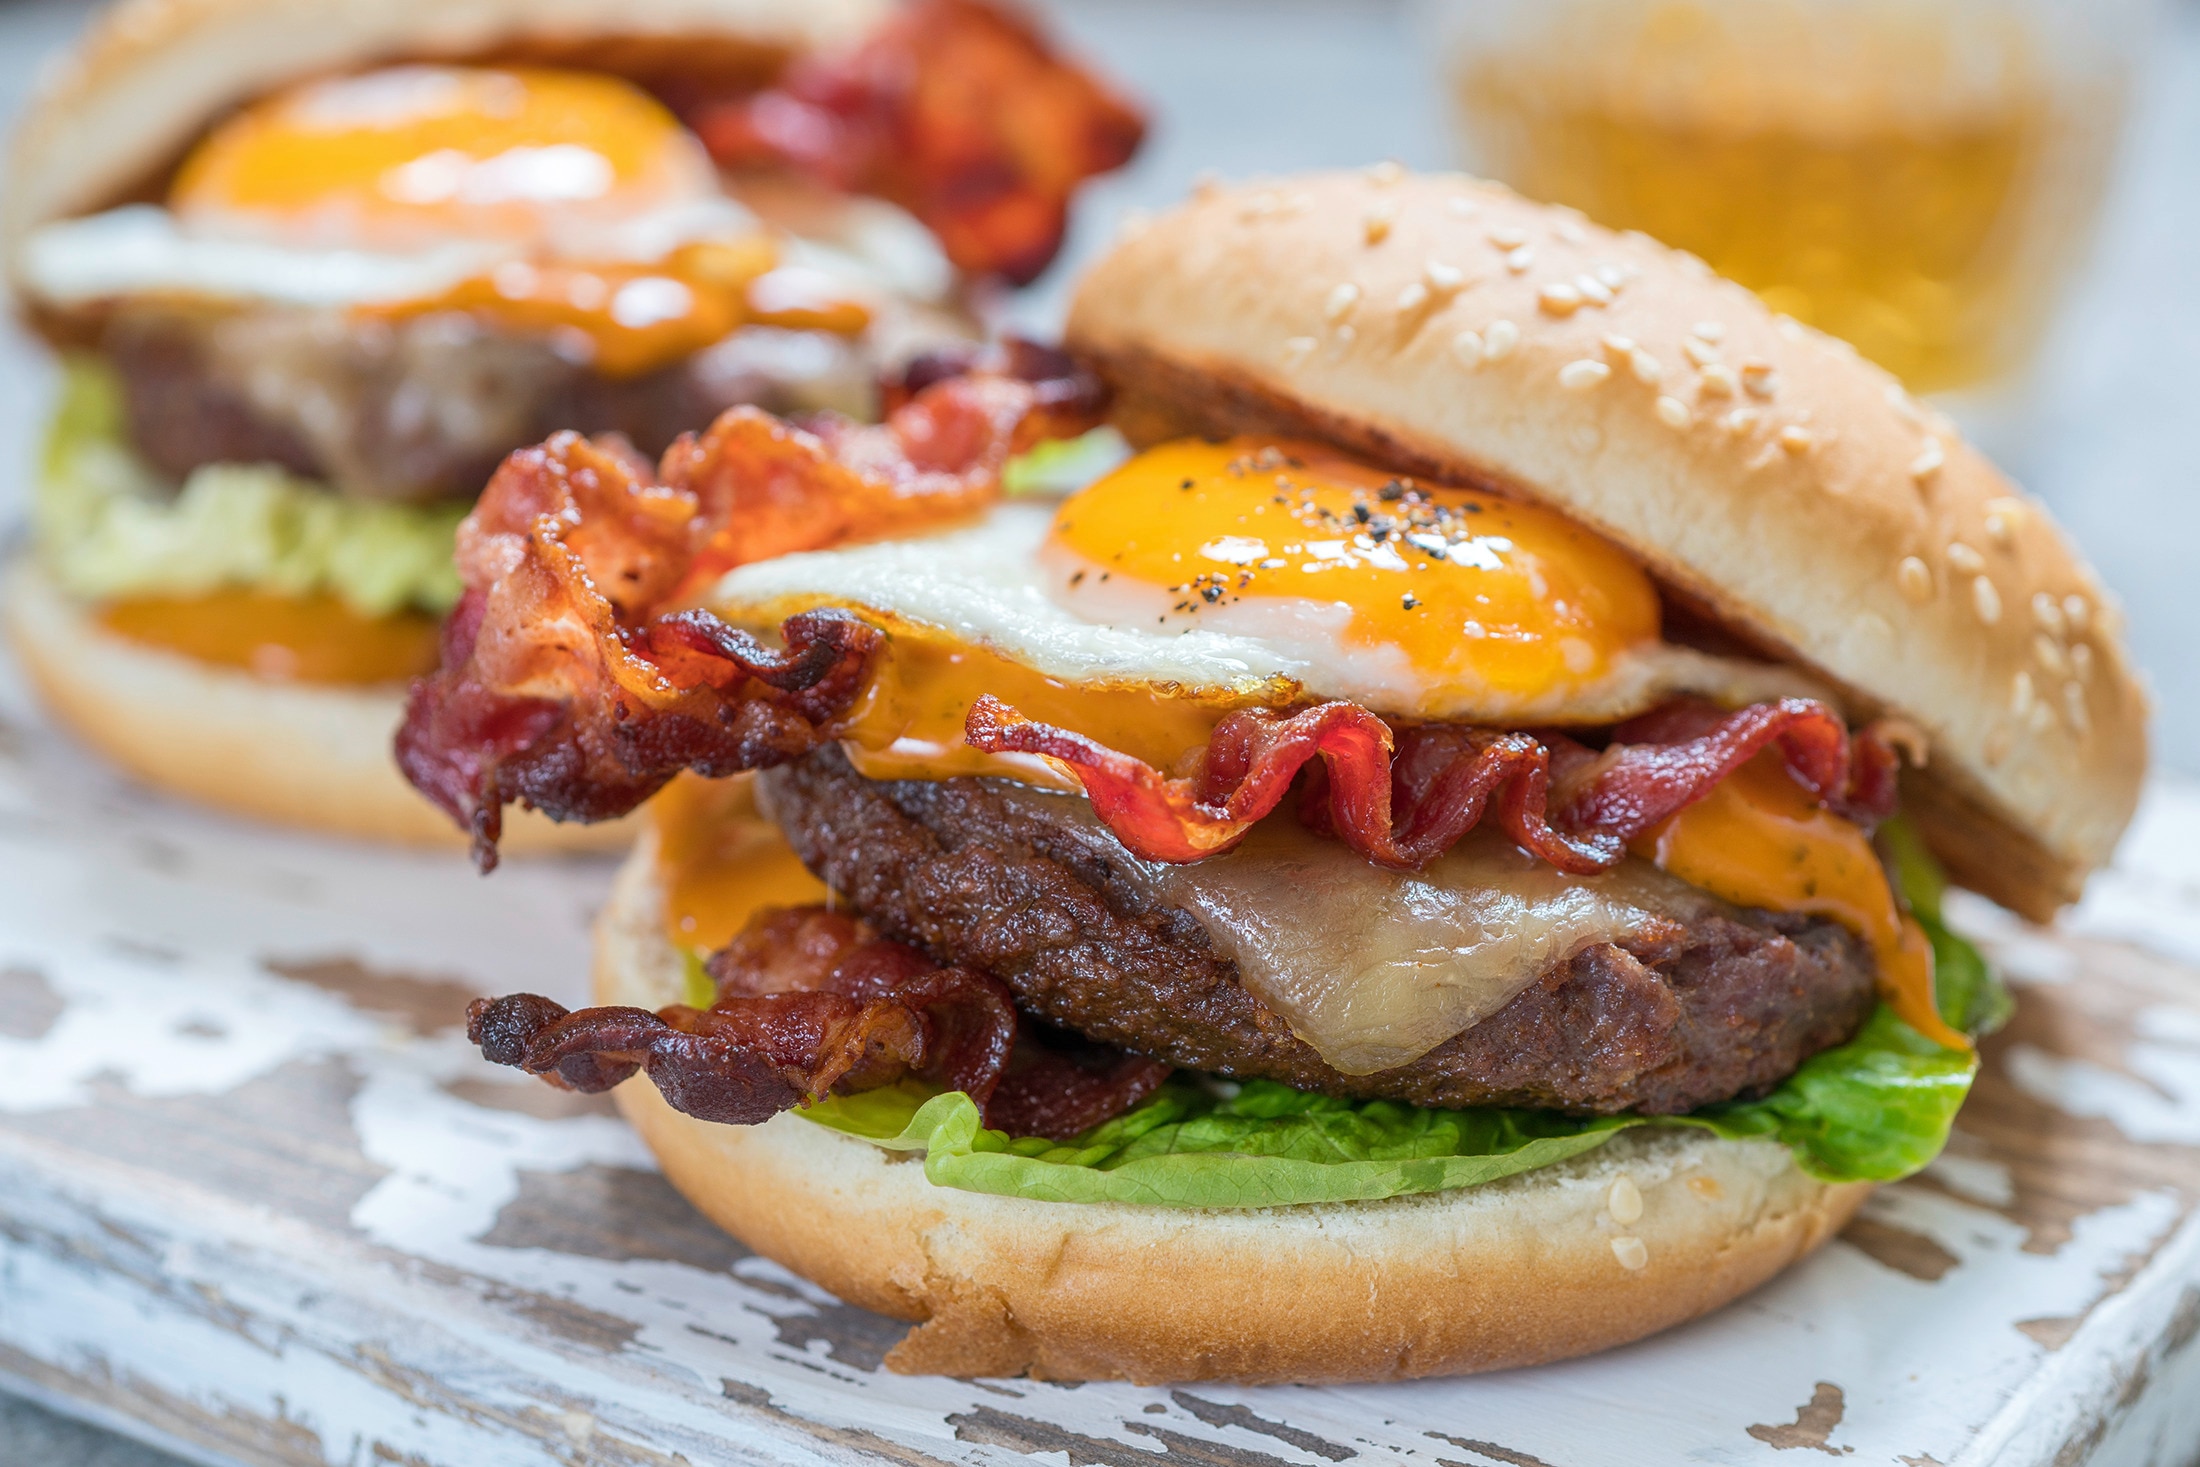 A burger with bacon, cheese, and egg